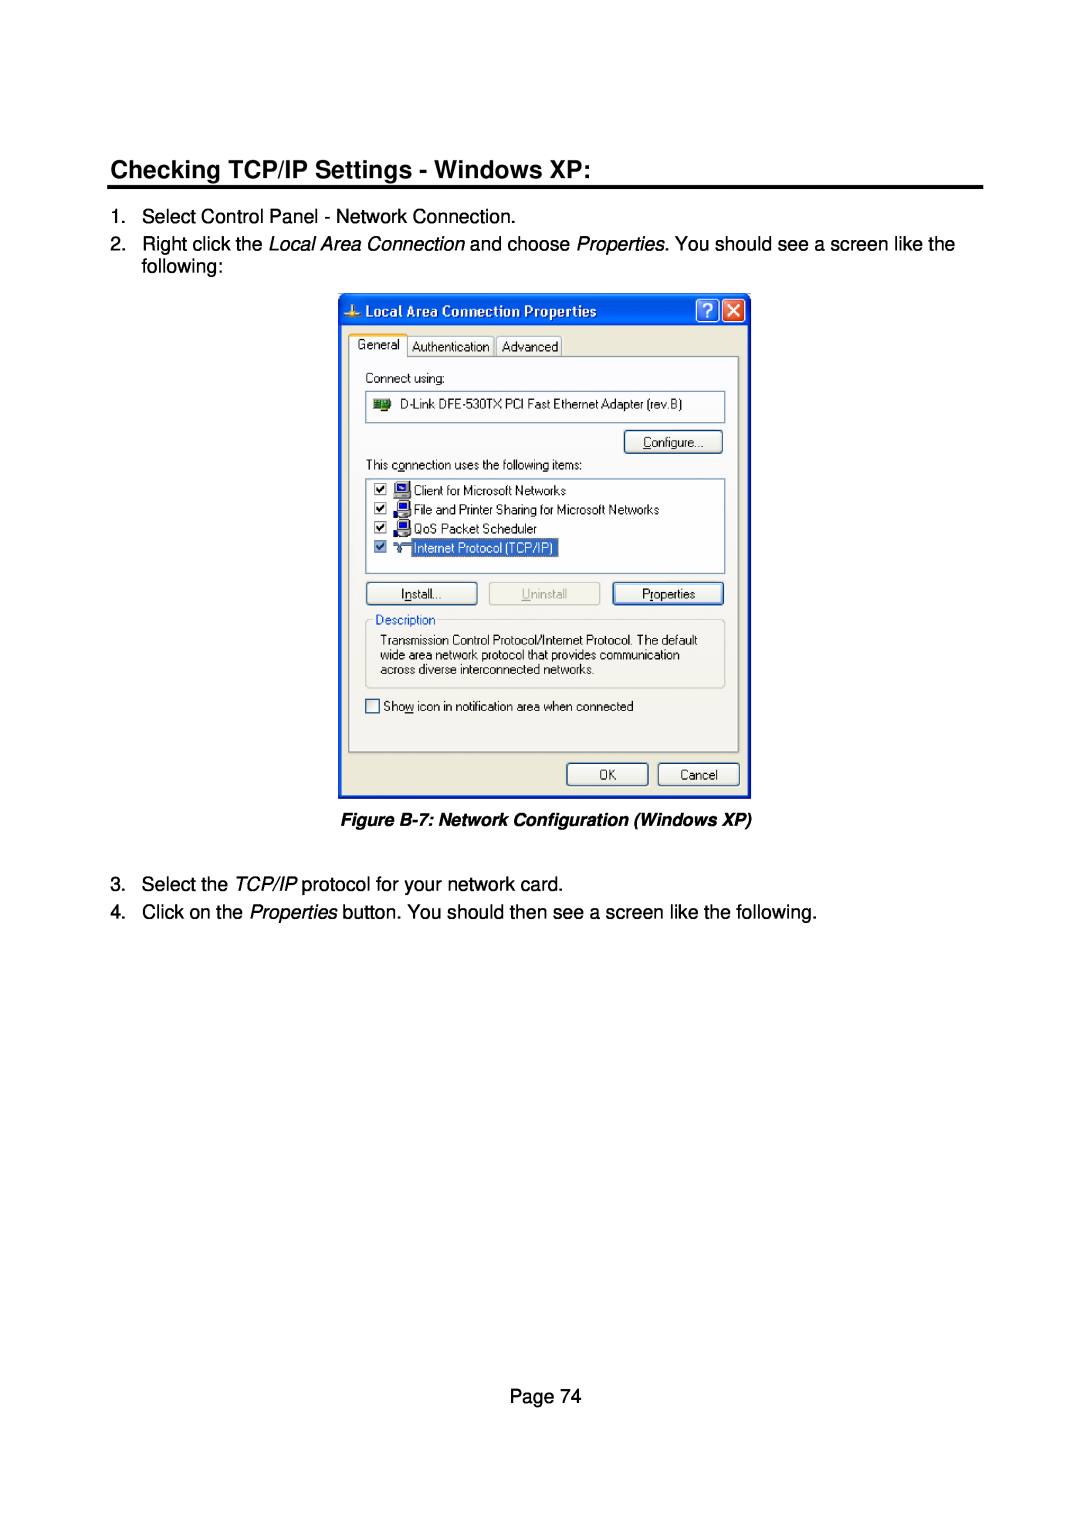 Edimax Technology Edimax user guide Router manual Checking TCP/IP Settings - Windows XP 